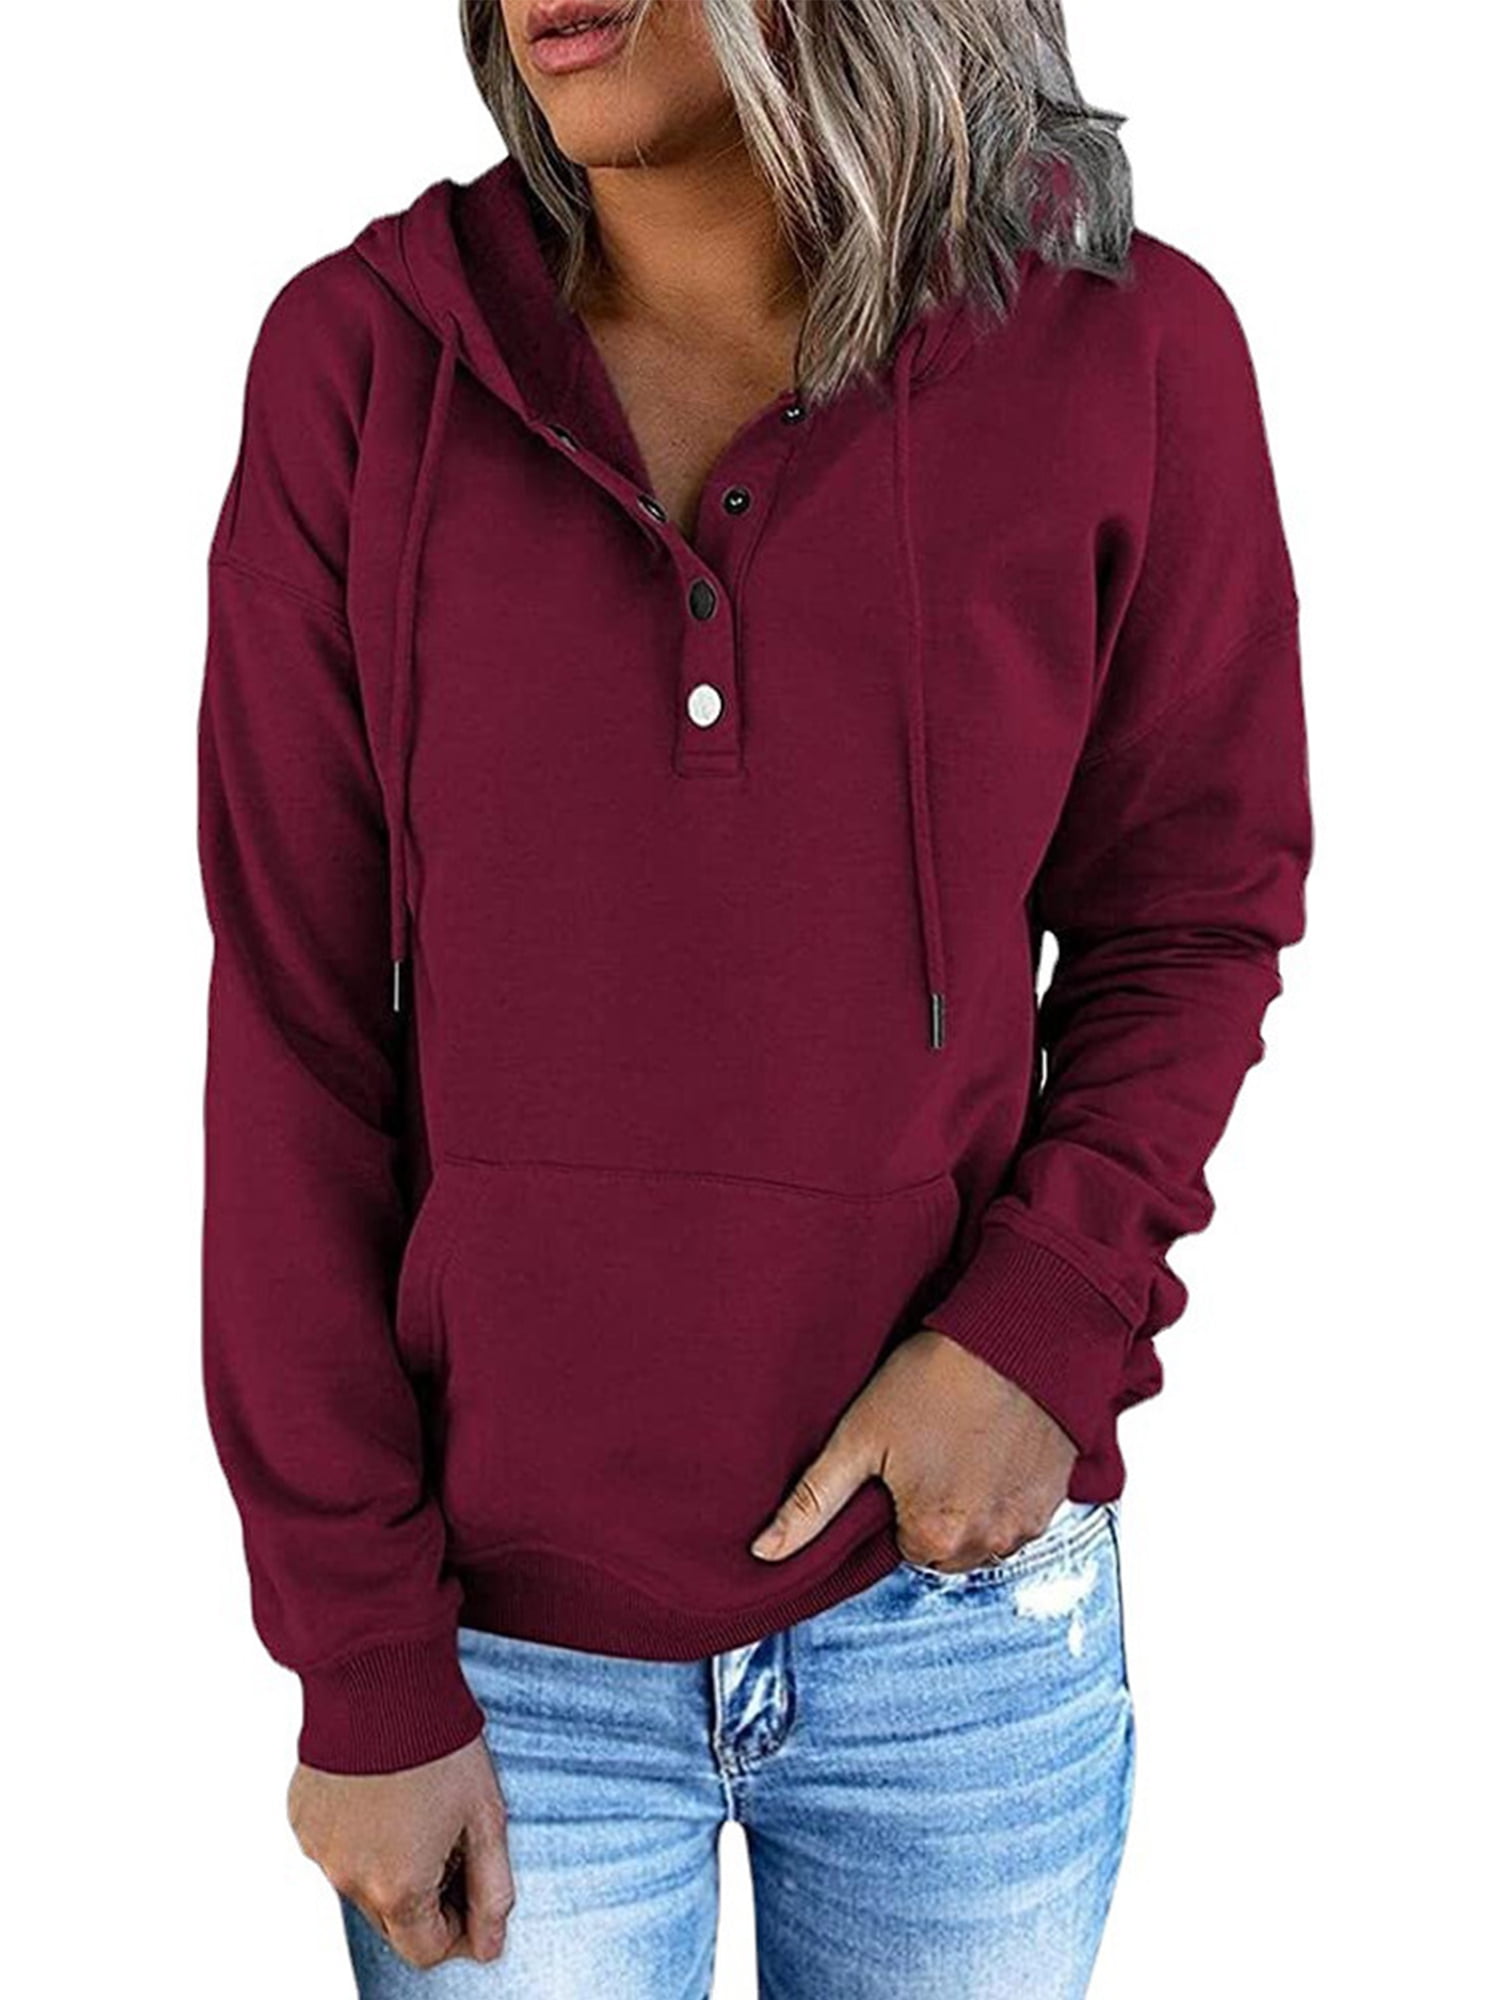 Amoretu Hoodies for Women Button up Drawstring Hooded Loose Tops, Wine ...